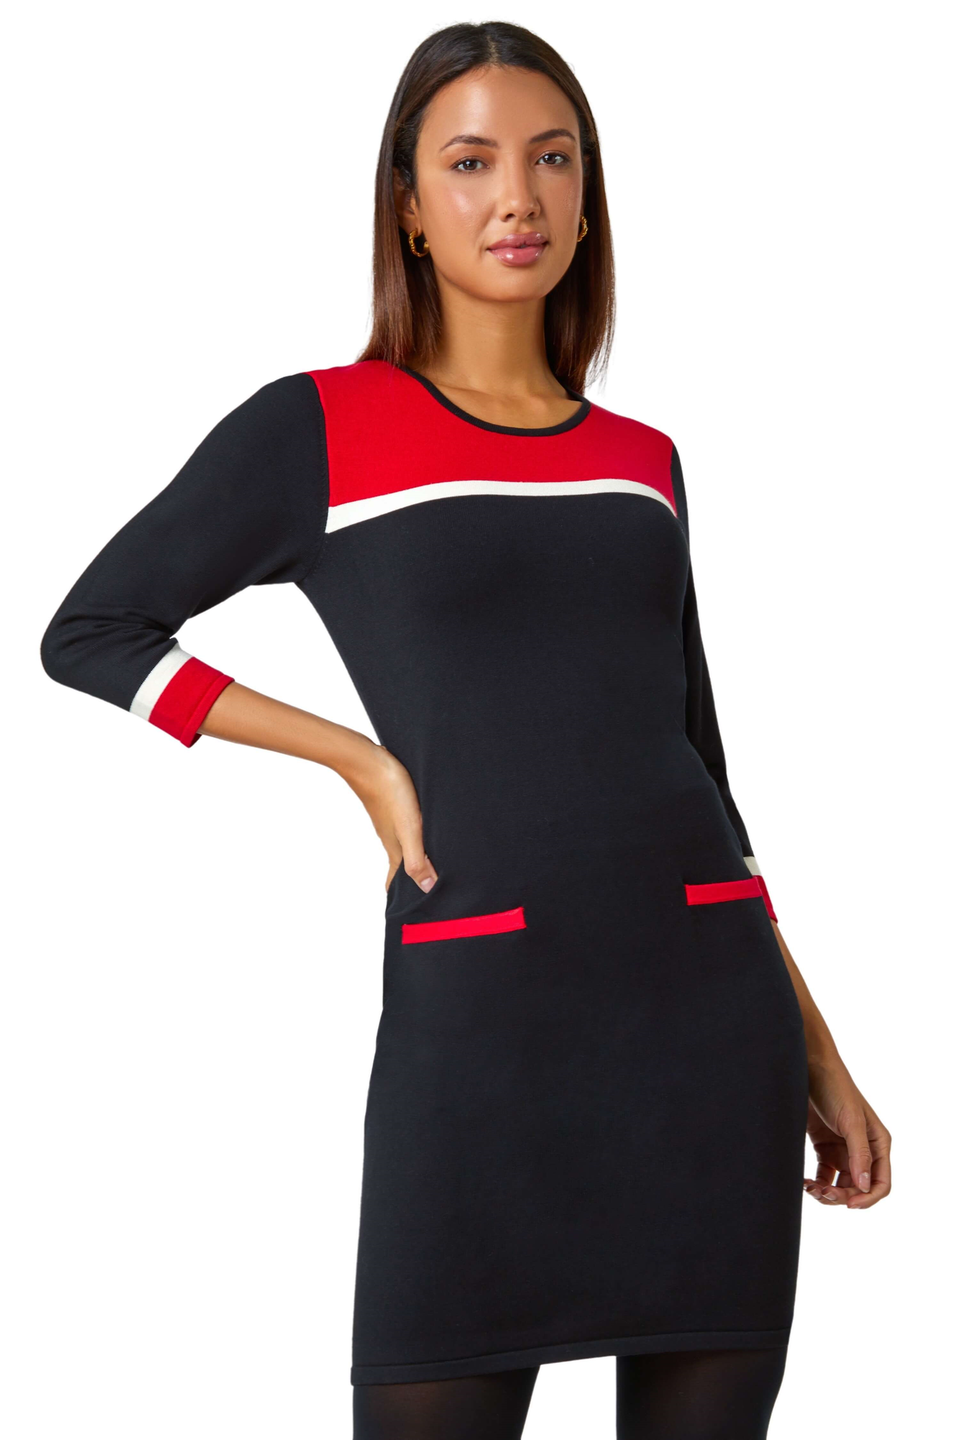 Red Cable Knit Dress - Matalan